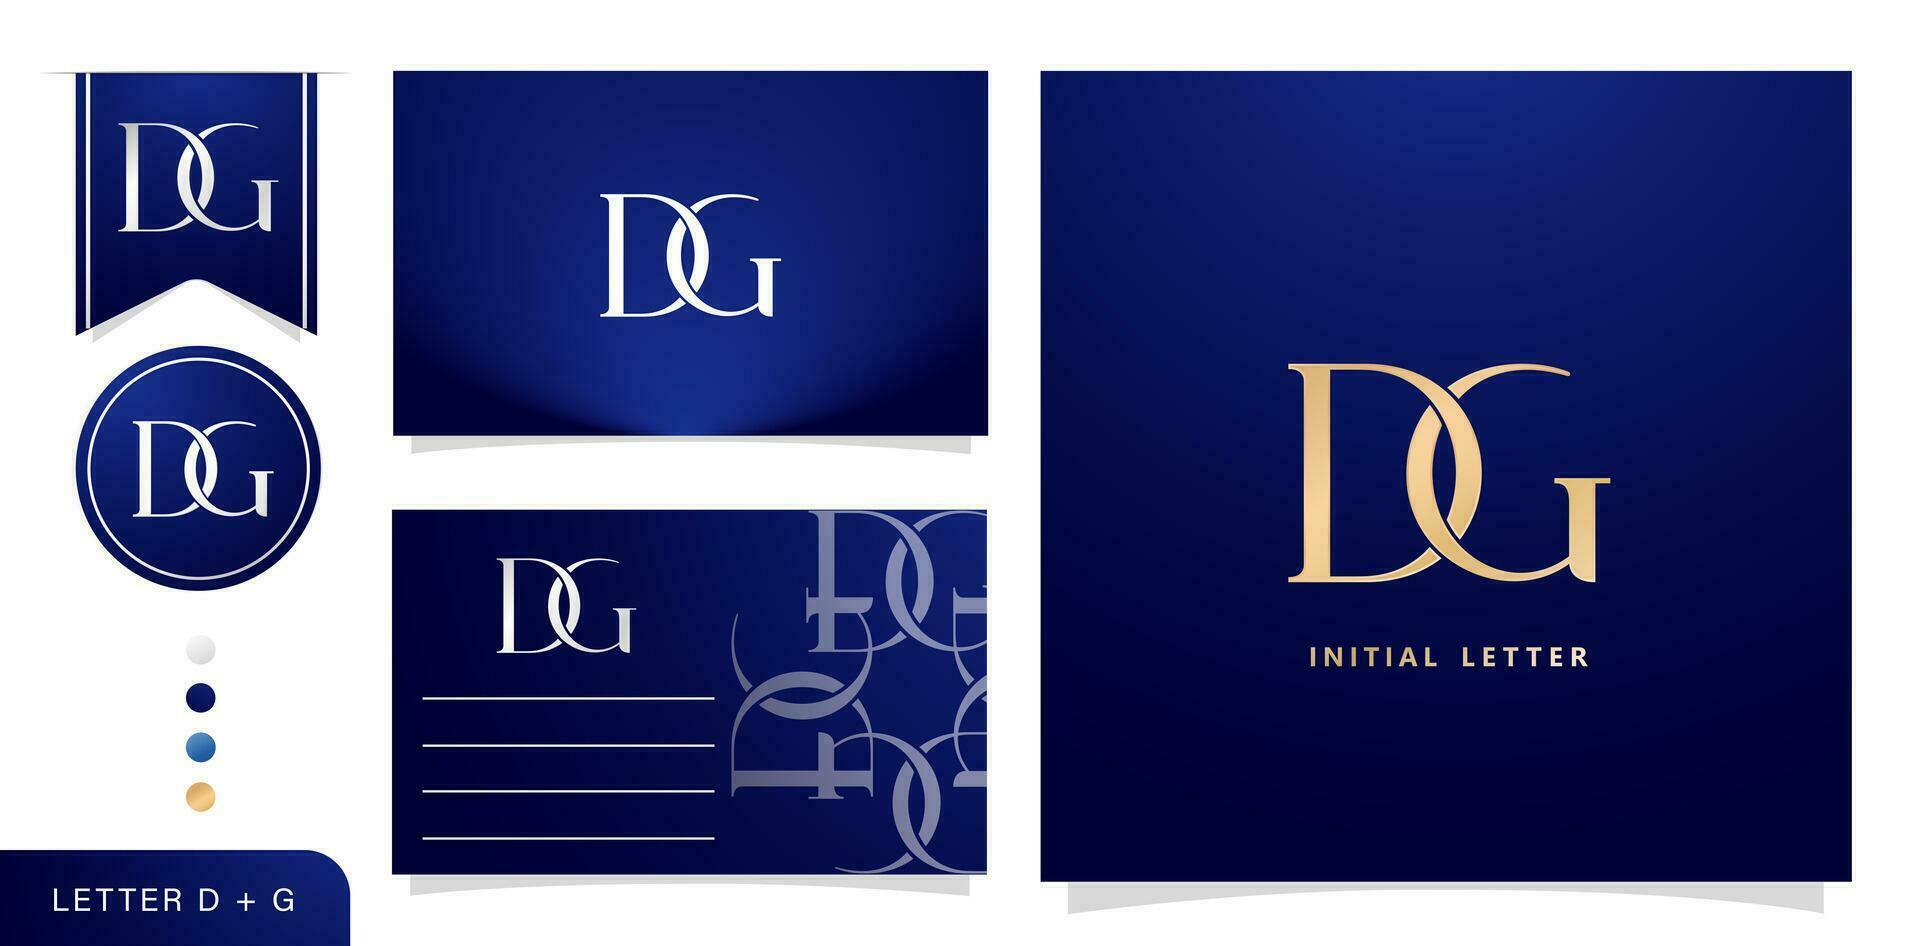 a set of business cards with the letter dg, Luxury Initial Letters D and G Logos Designs in Blue Colors for branding ads campaigns, letterpress, embroidery, covering invitations, envelope sign symbols vector